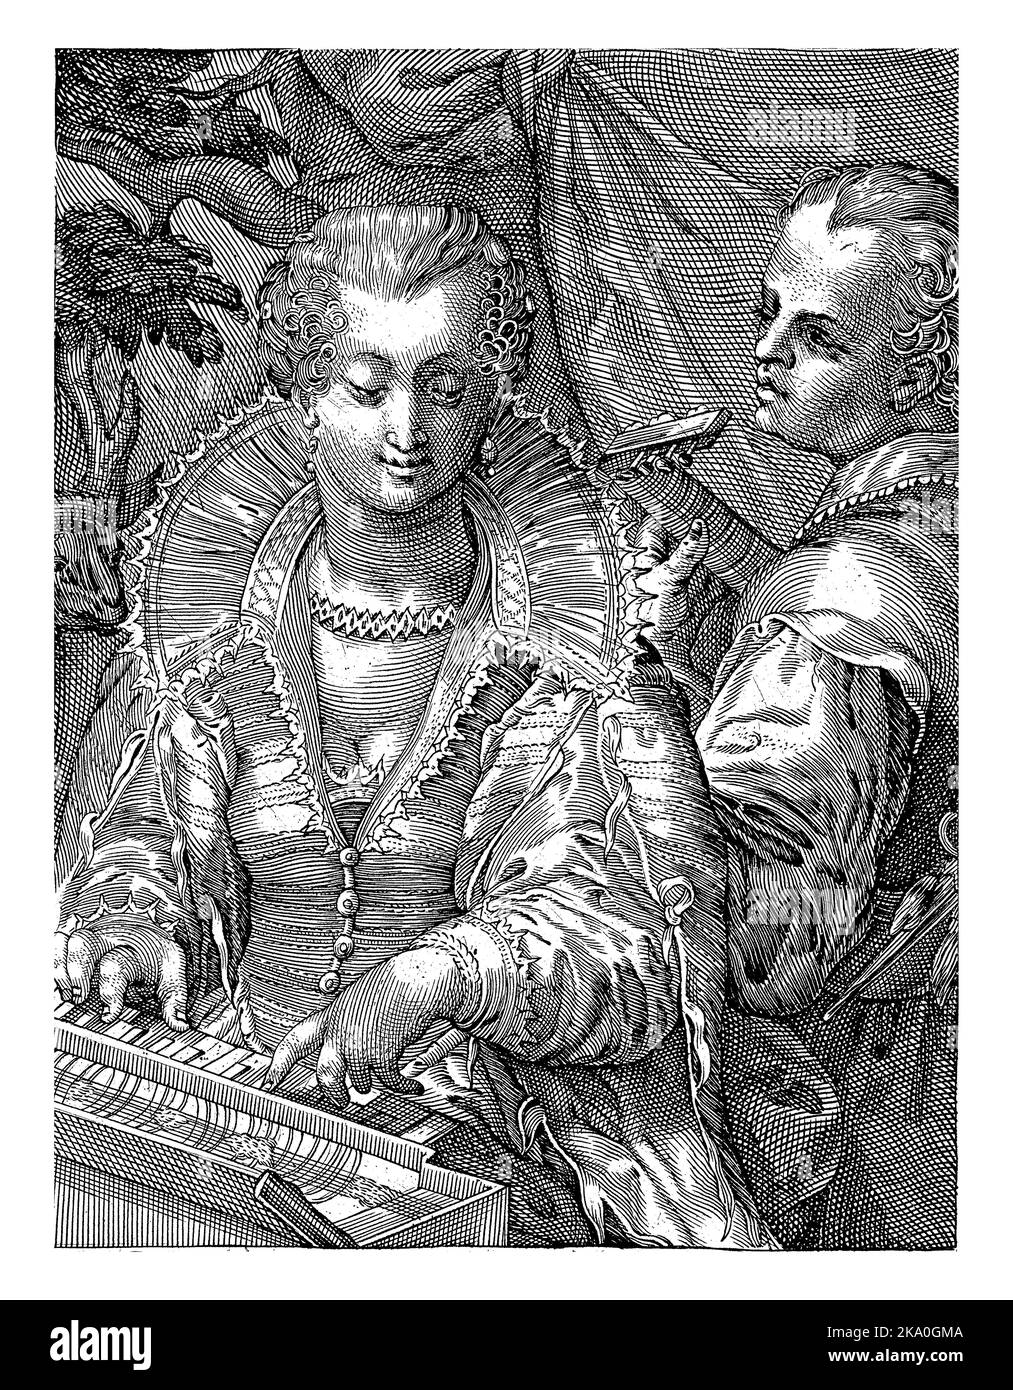 The female personification of the Hearing playing on a harpsichord. She is accompanied by a man who plays the lute. Stock Photo